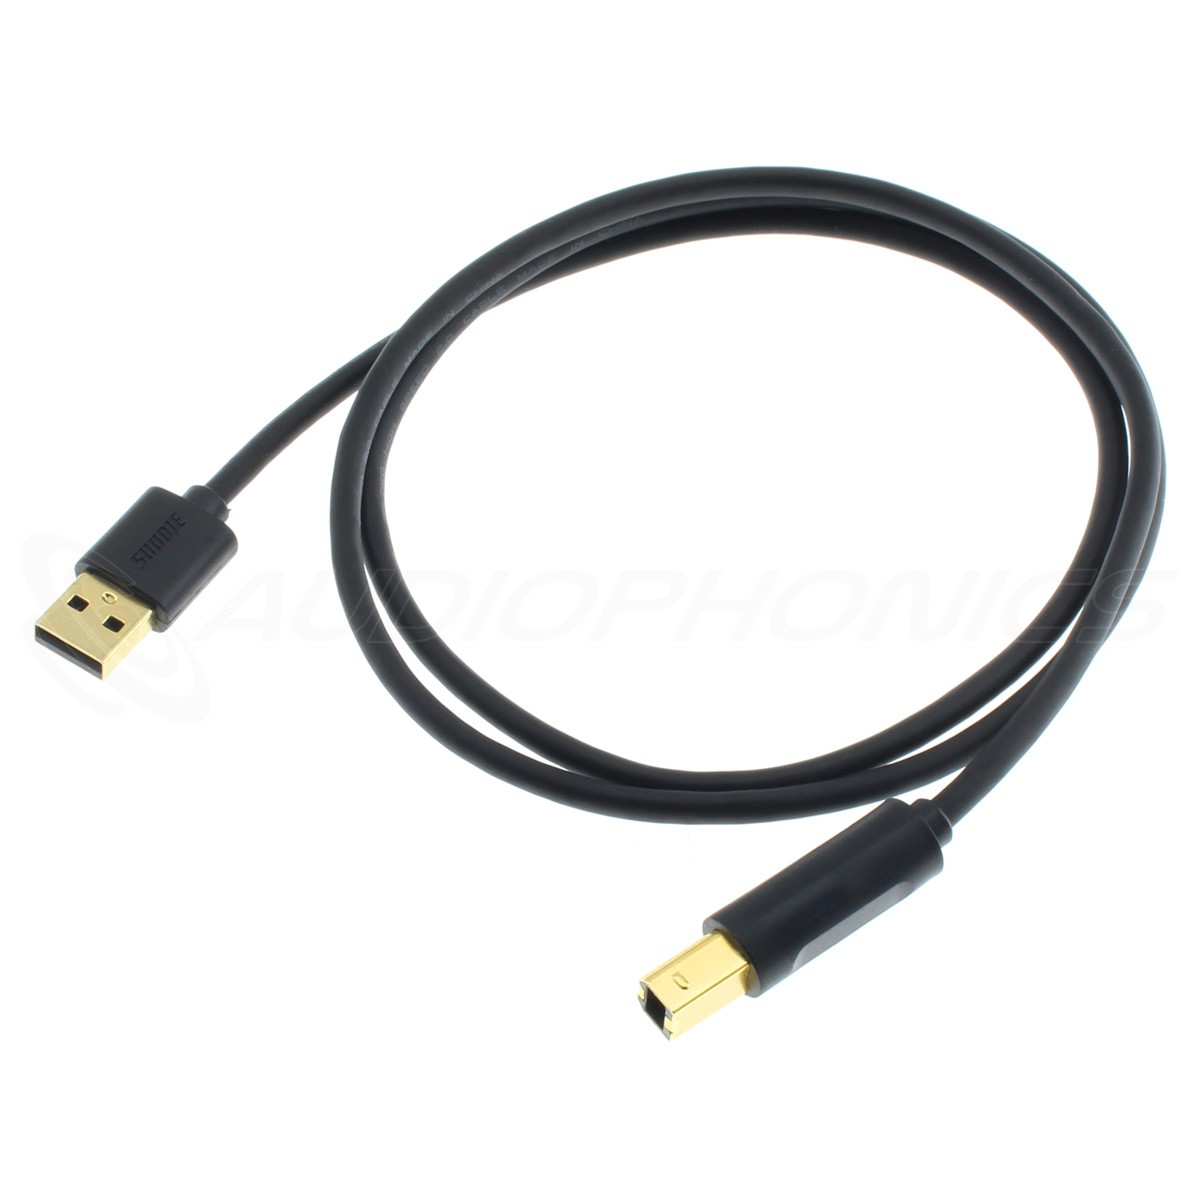 Male USB-A to Male USB-B Cable Copper Gold Plated 1m